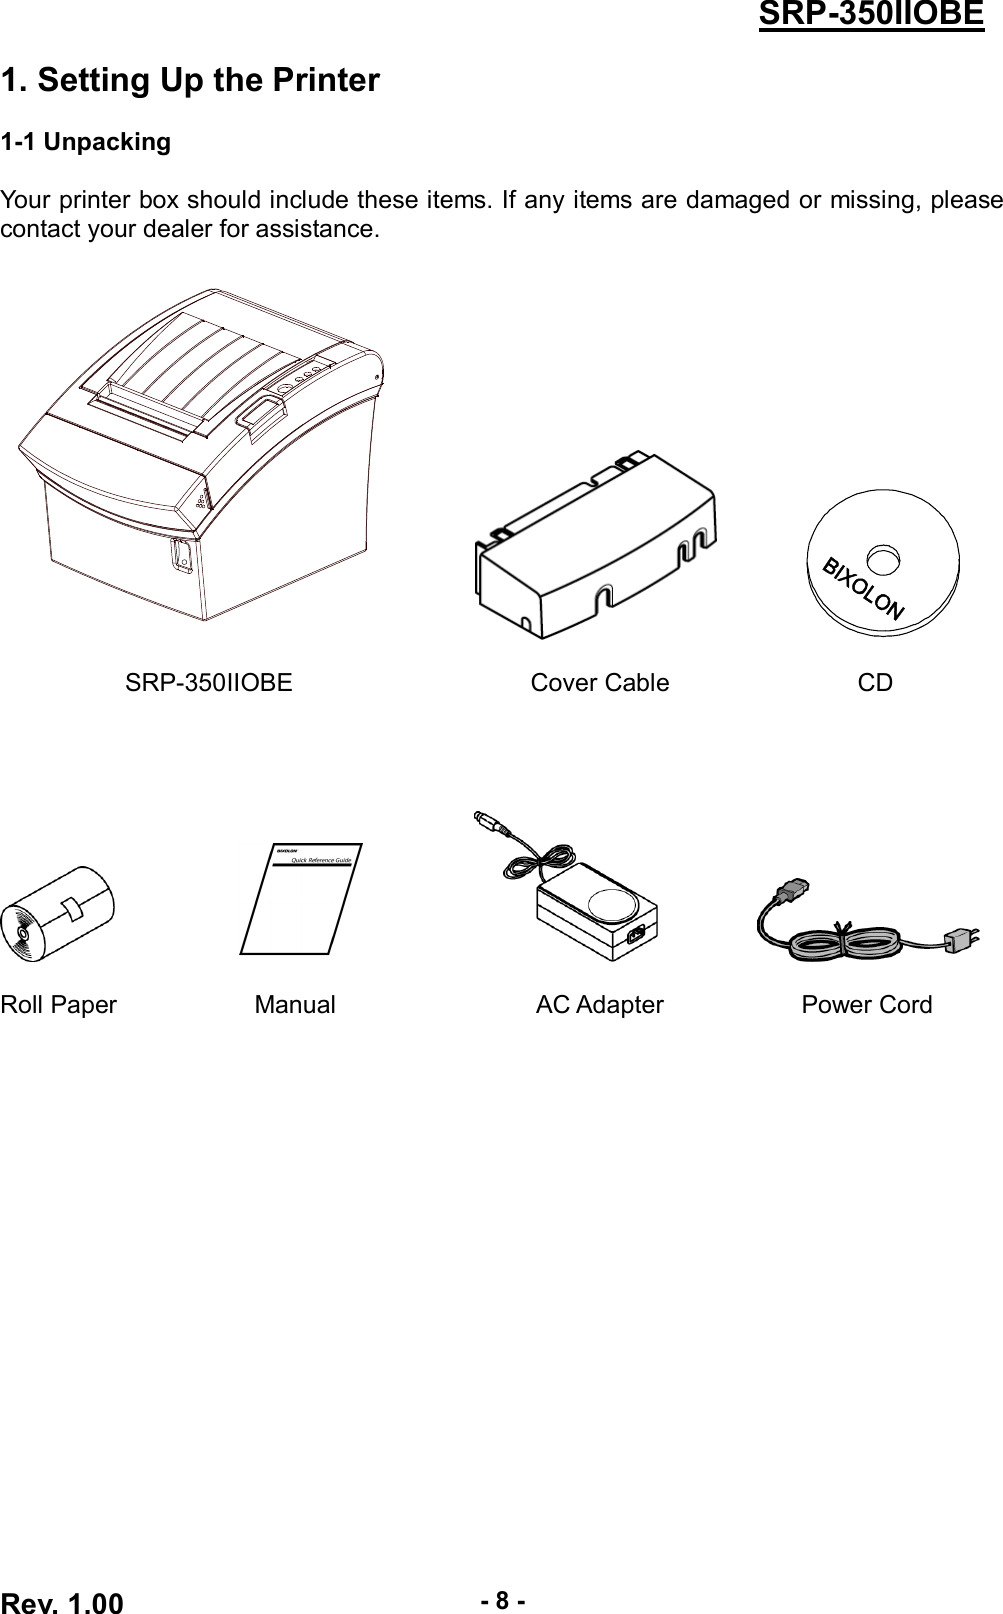  Rev. 1.00 - 8 - SRP-350IIOBE 1. Setting Up the Printer  1-1 Unpacking  Your printer box should include these items. If any items are damaged or missing, please contact your dealer for assistance.                    SRP-350IIOBE                                      Cover Cable                              CD                                     Roll Paper                      Manual                                AC Adapter                      Power Cord 